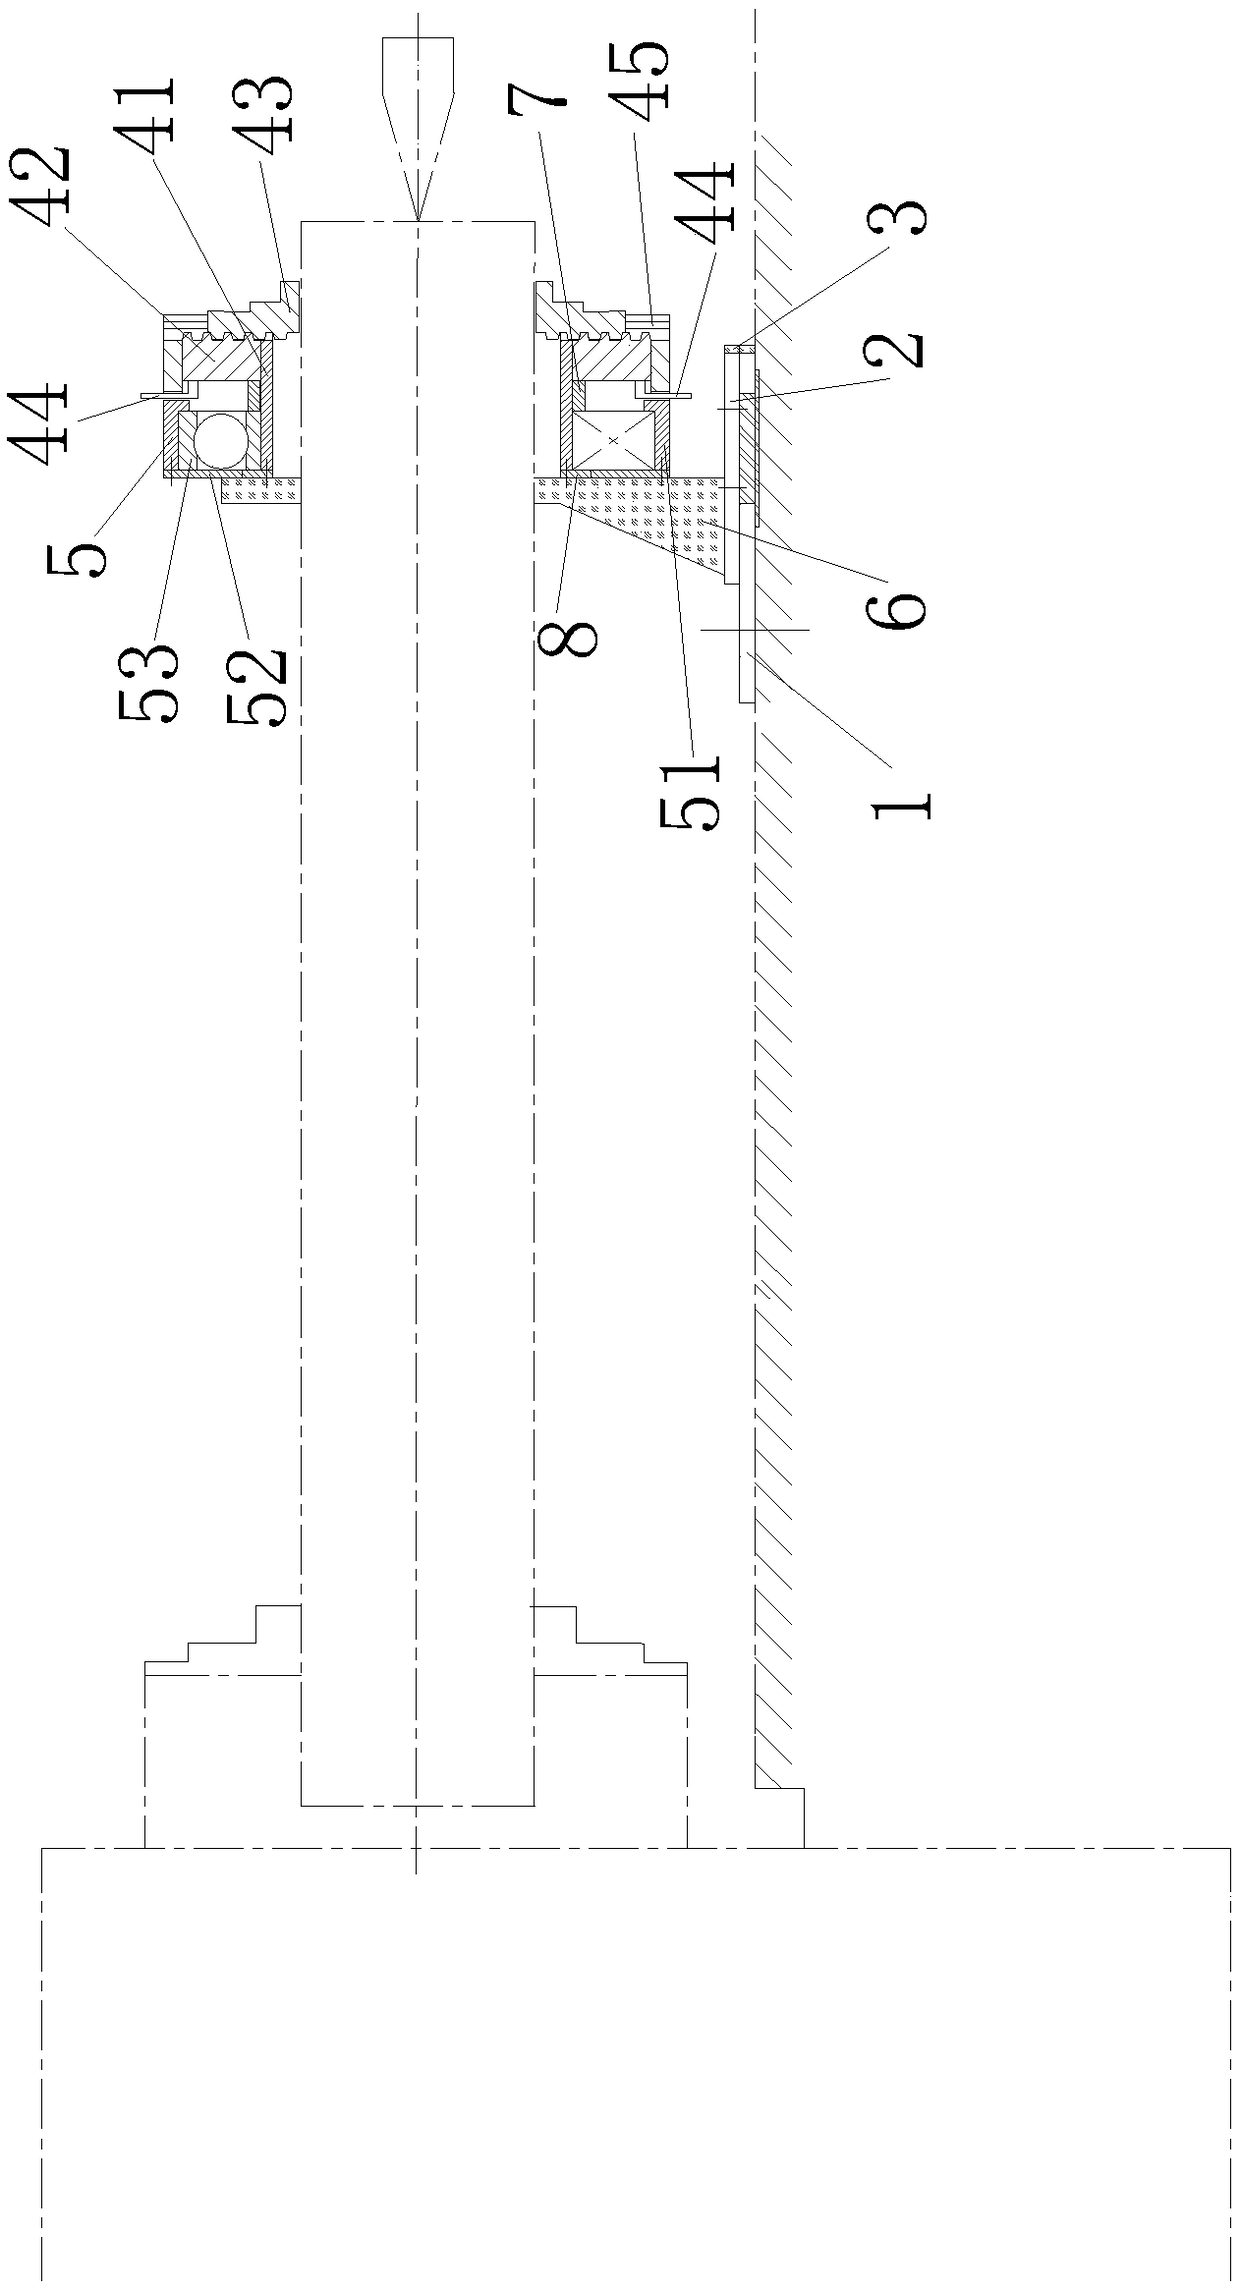 Rotating table type self-centering rotating center frame of lathe